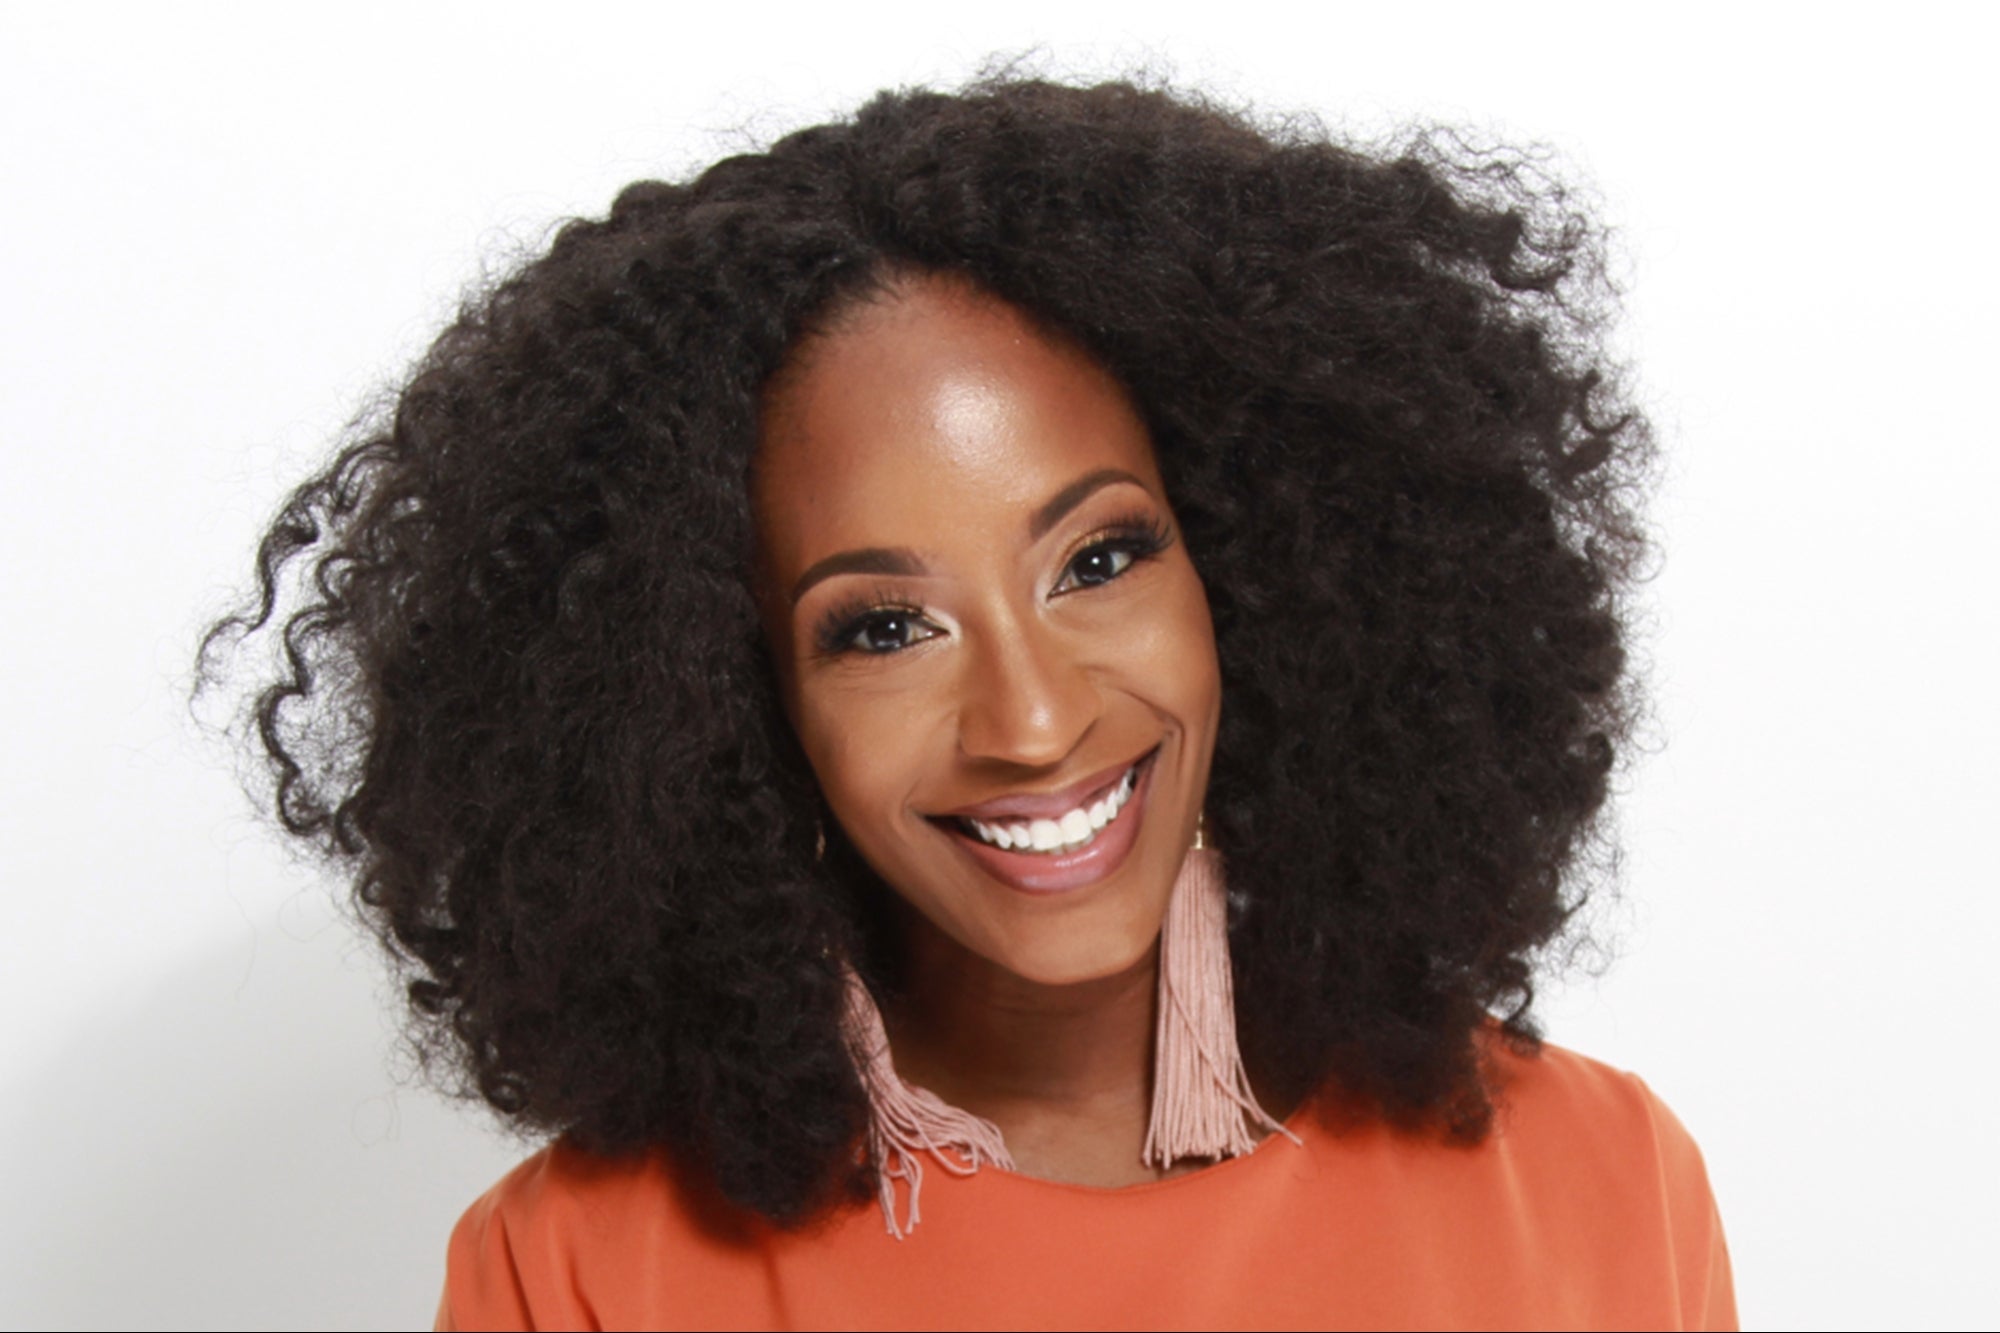 Free Webinar | February 15: How to Build and Elevate A Black-Owned Brand